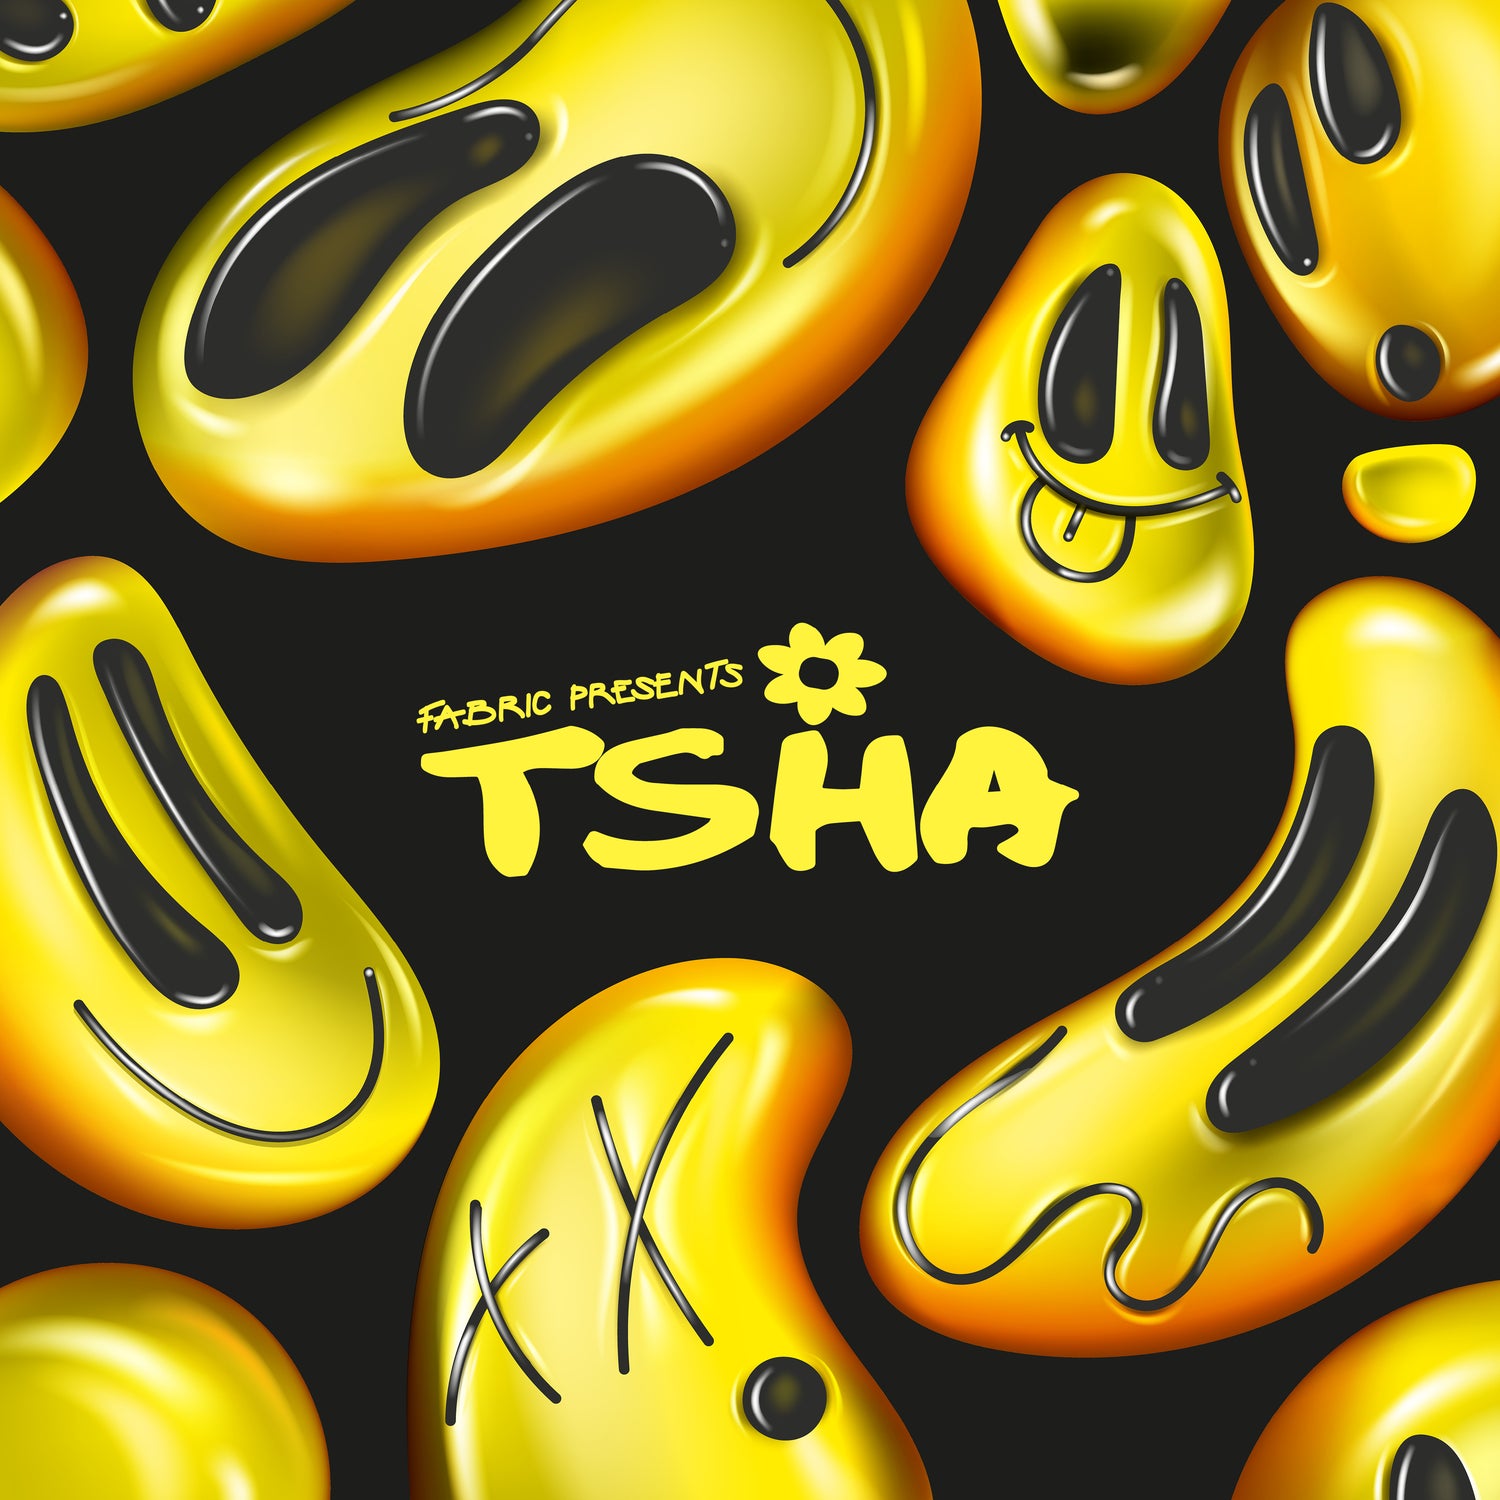 3D morphing raver smiley faces with different expressions around TSHA's logo